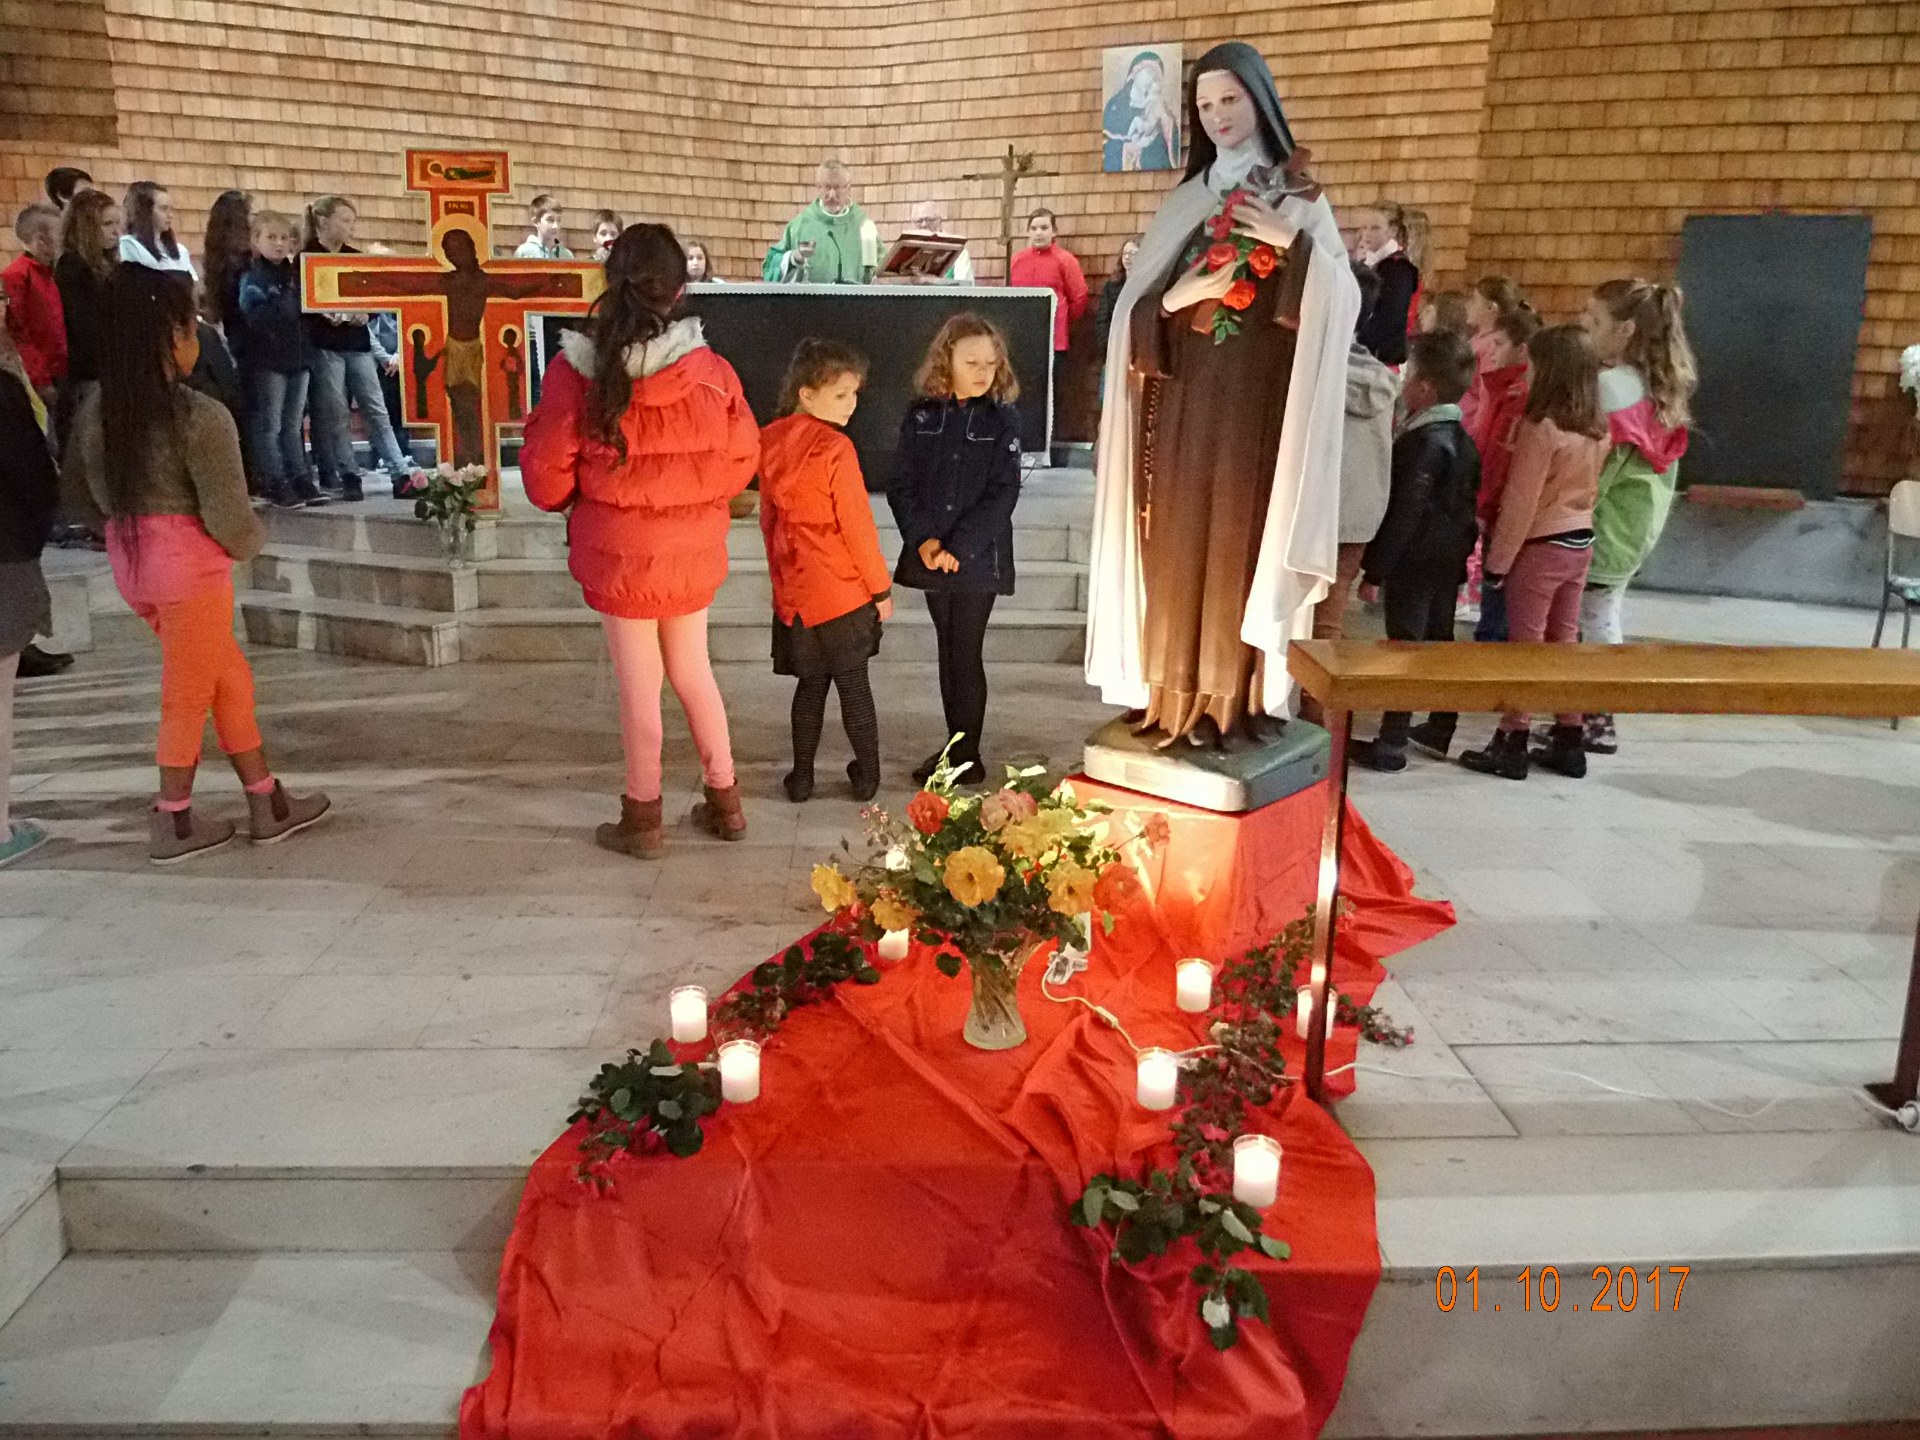 1-10-2017-Ste Therese (83)